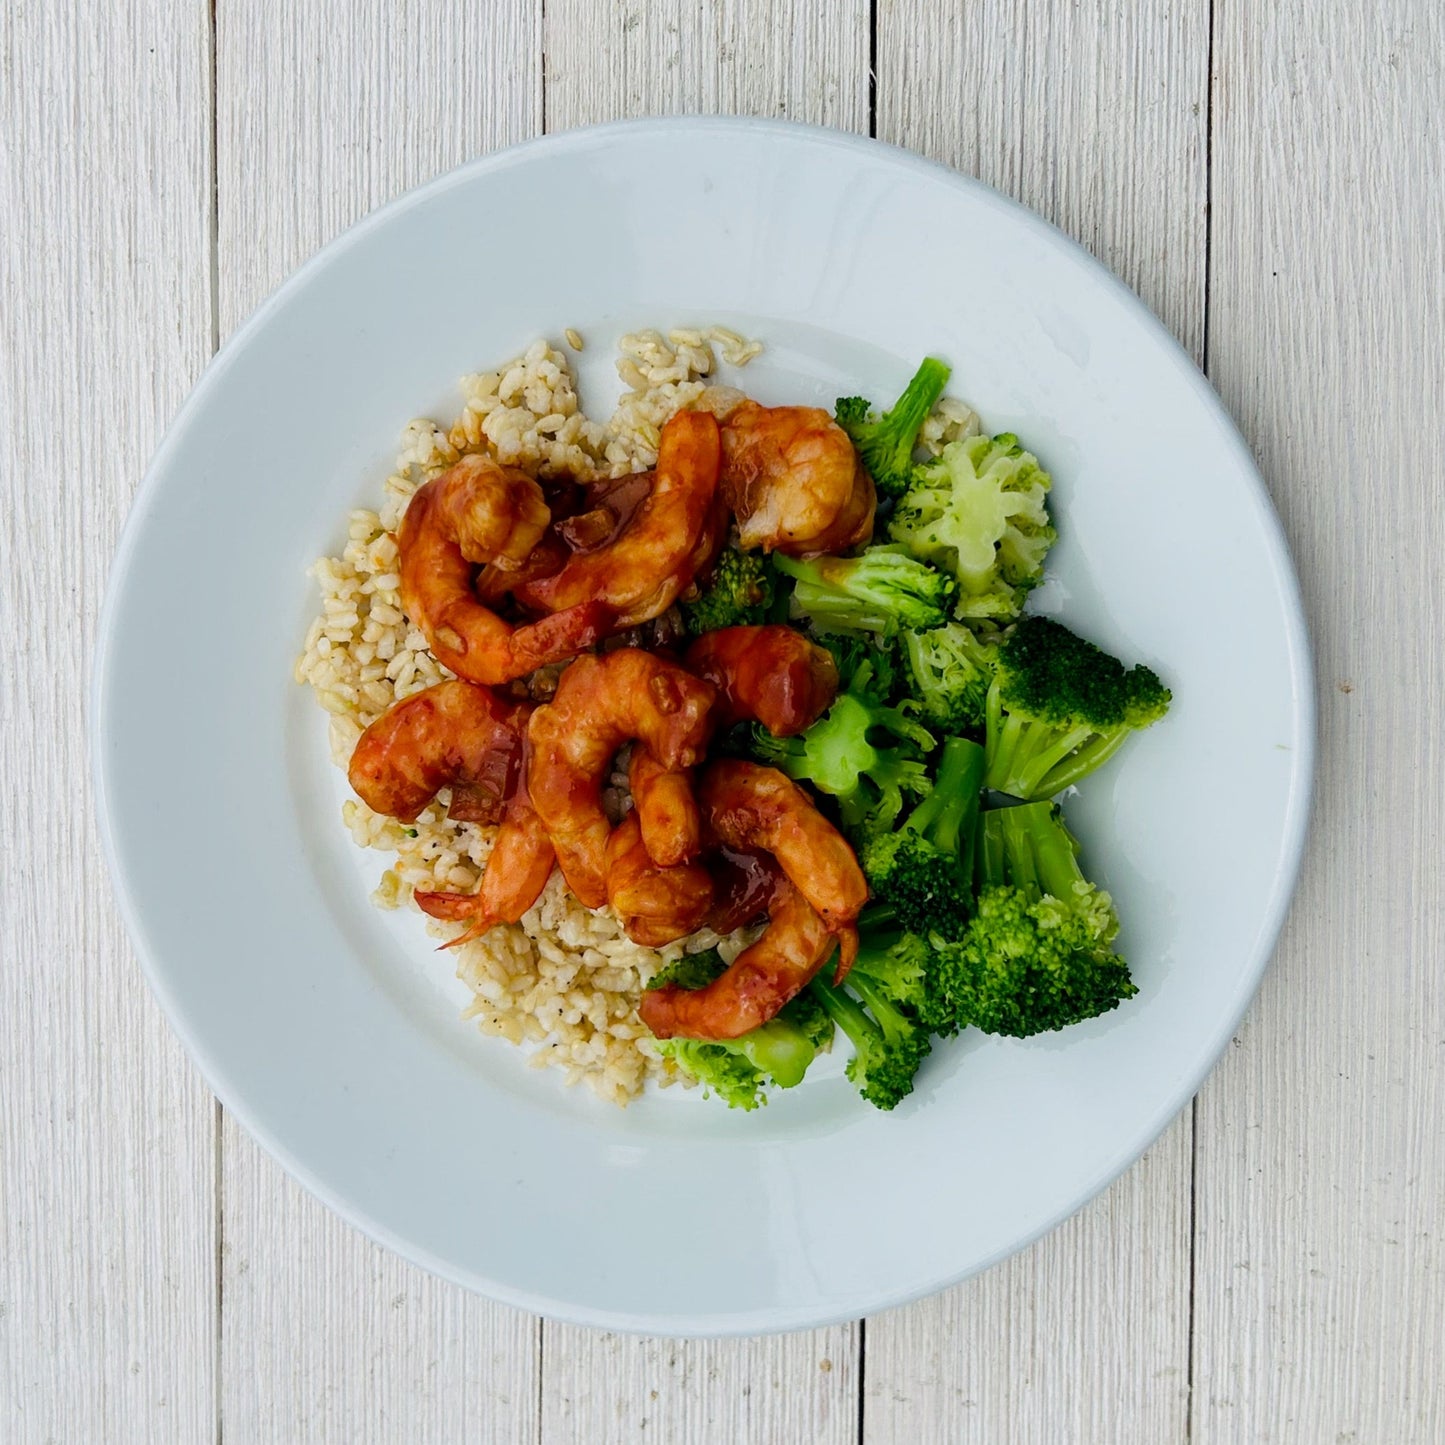 Barbecue Shrimp with Brown Rice & Broccoli